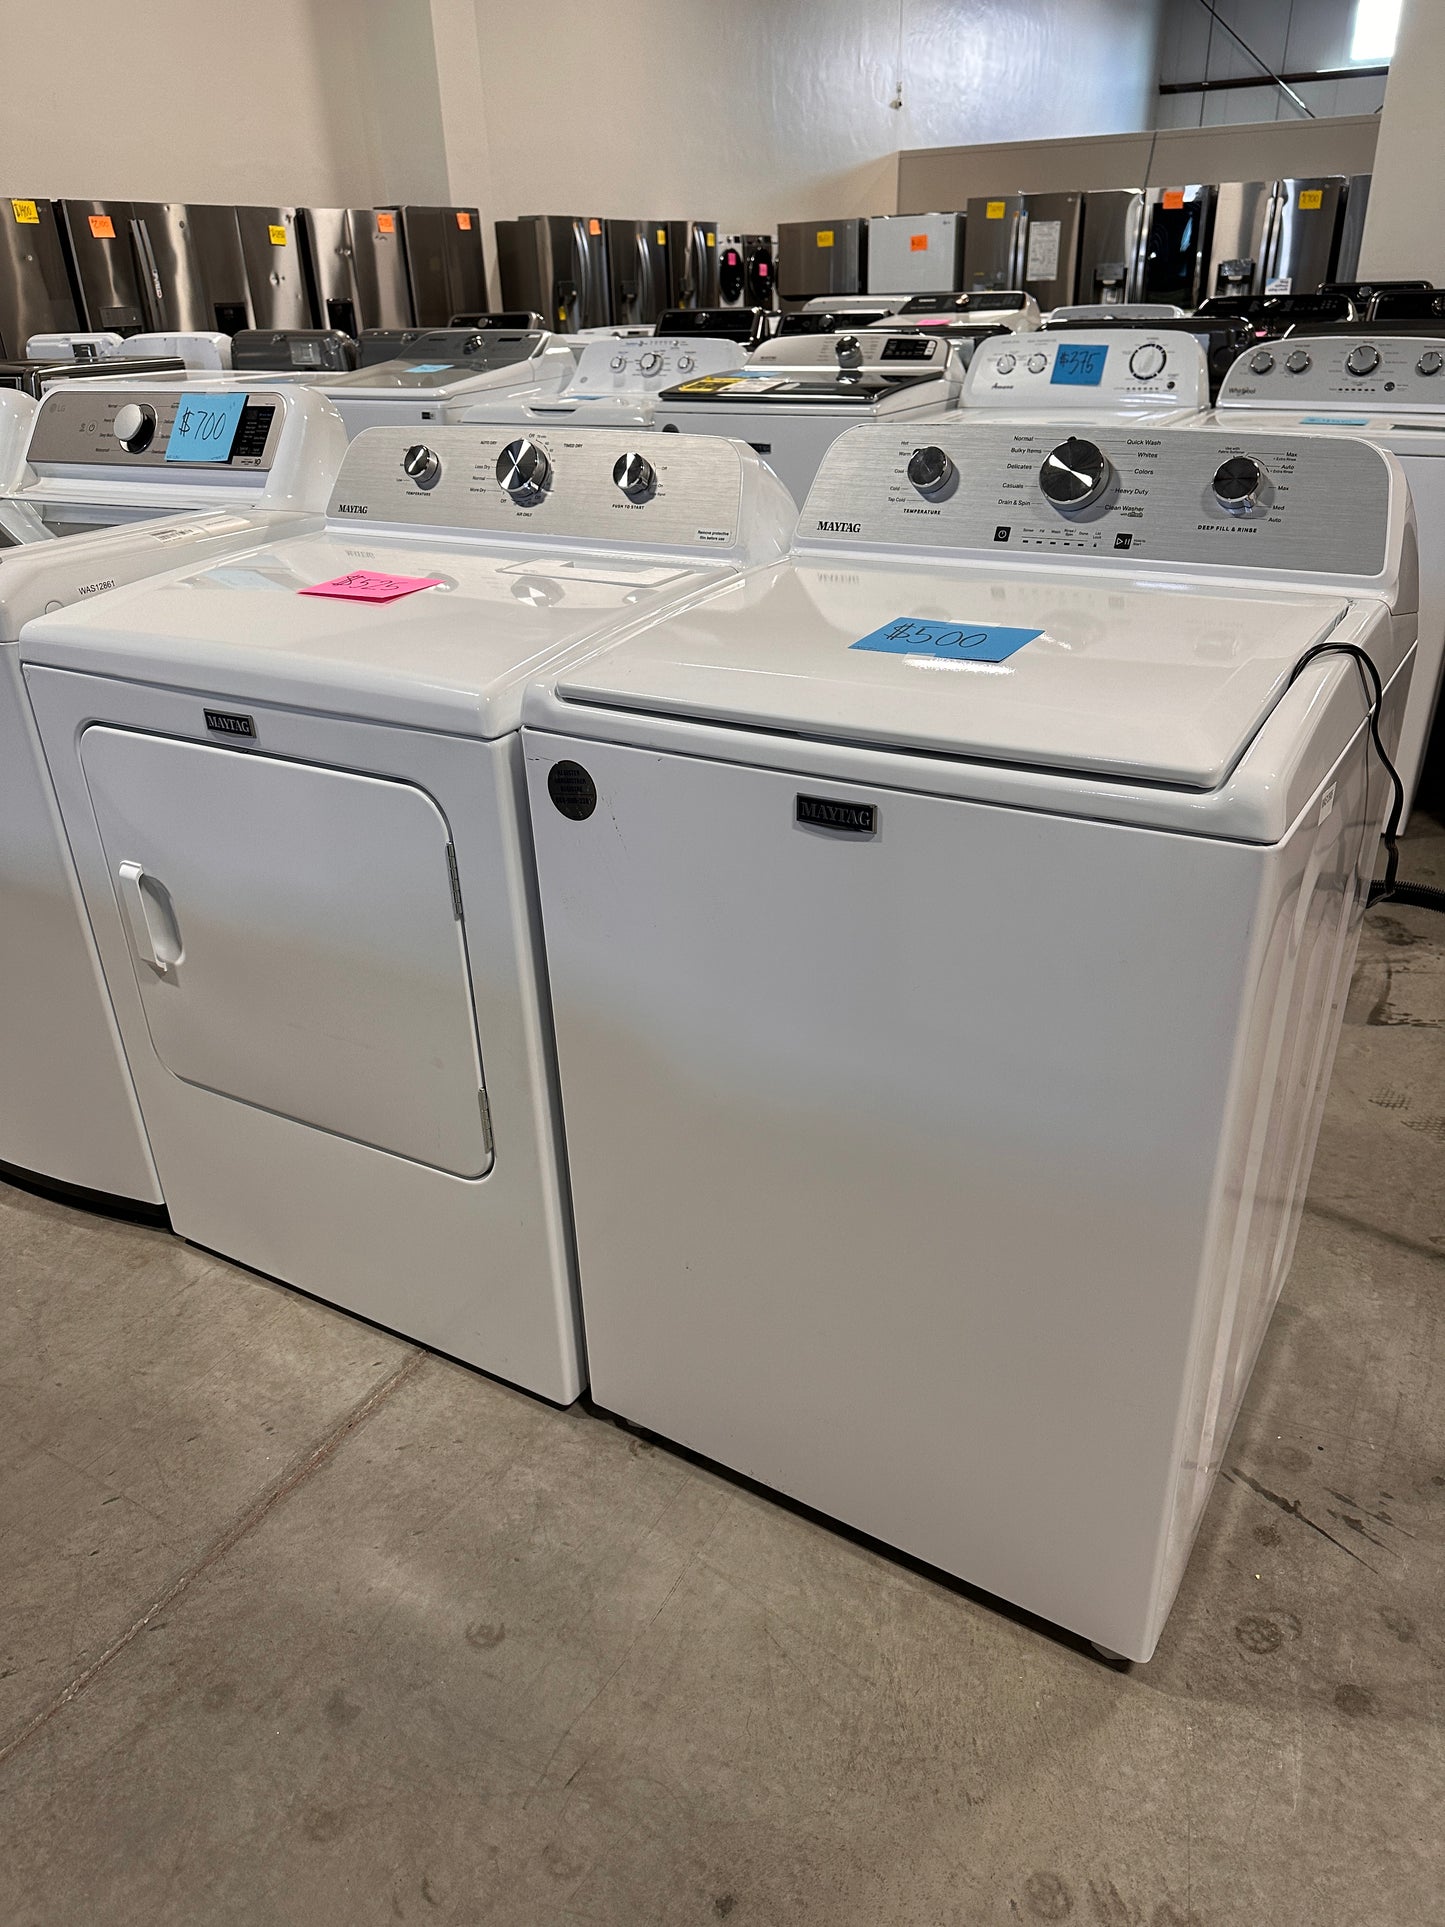 NEW MODEL MED4500MW DRYER and MVW4504MW TOP LOAD WASHER LAUNDRY SET - DRY12265 WAS12906